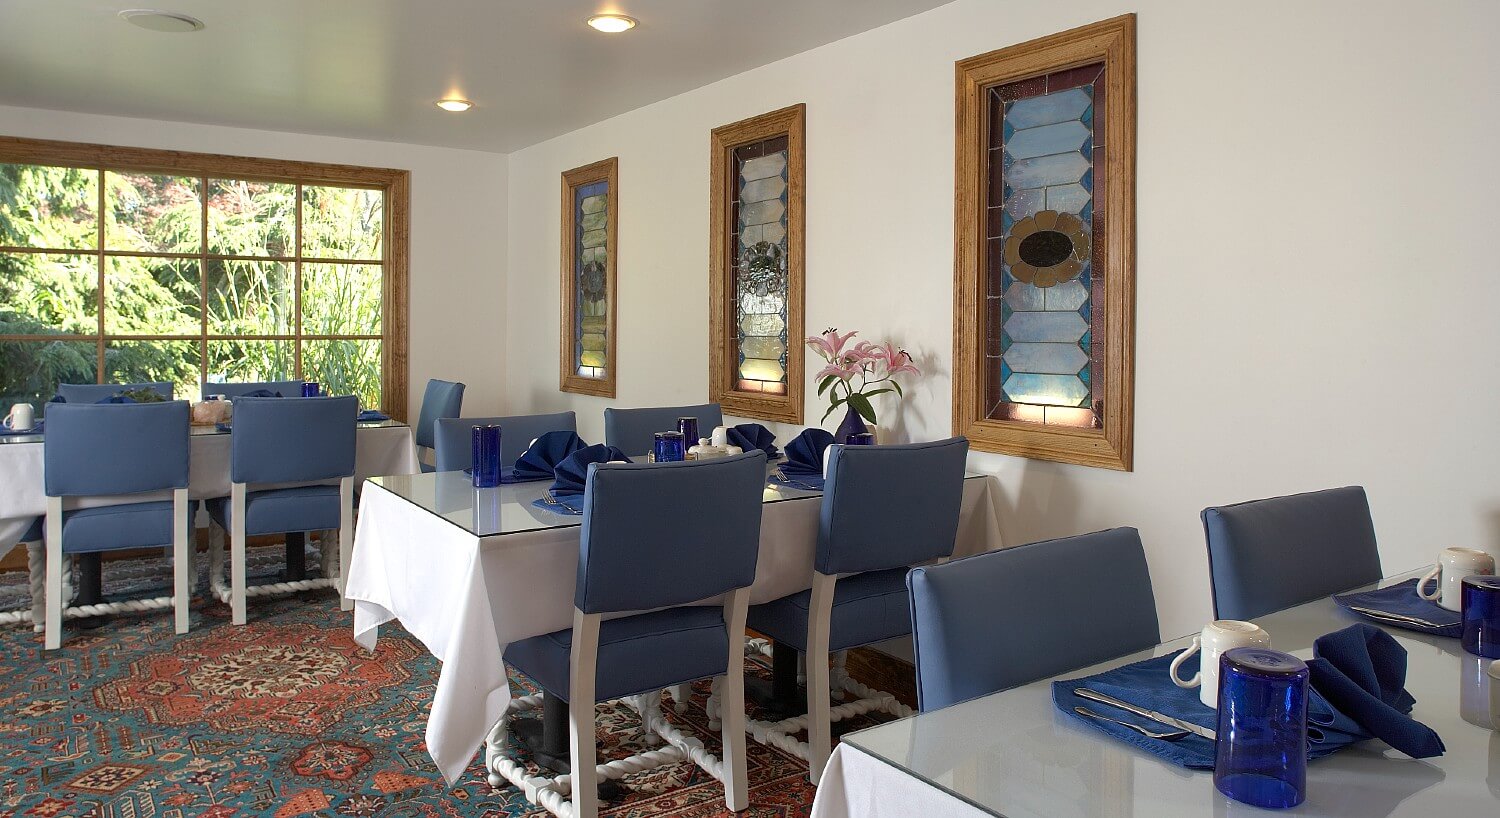 Dining area with stained glass windows and three glass top tables with with blue chairs set for breakfast